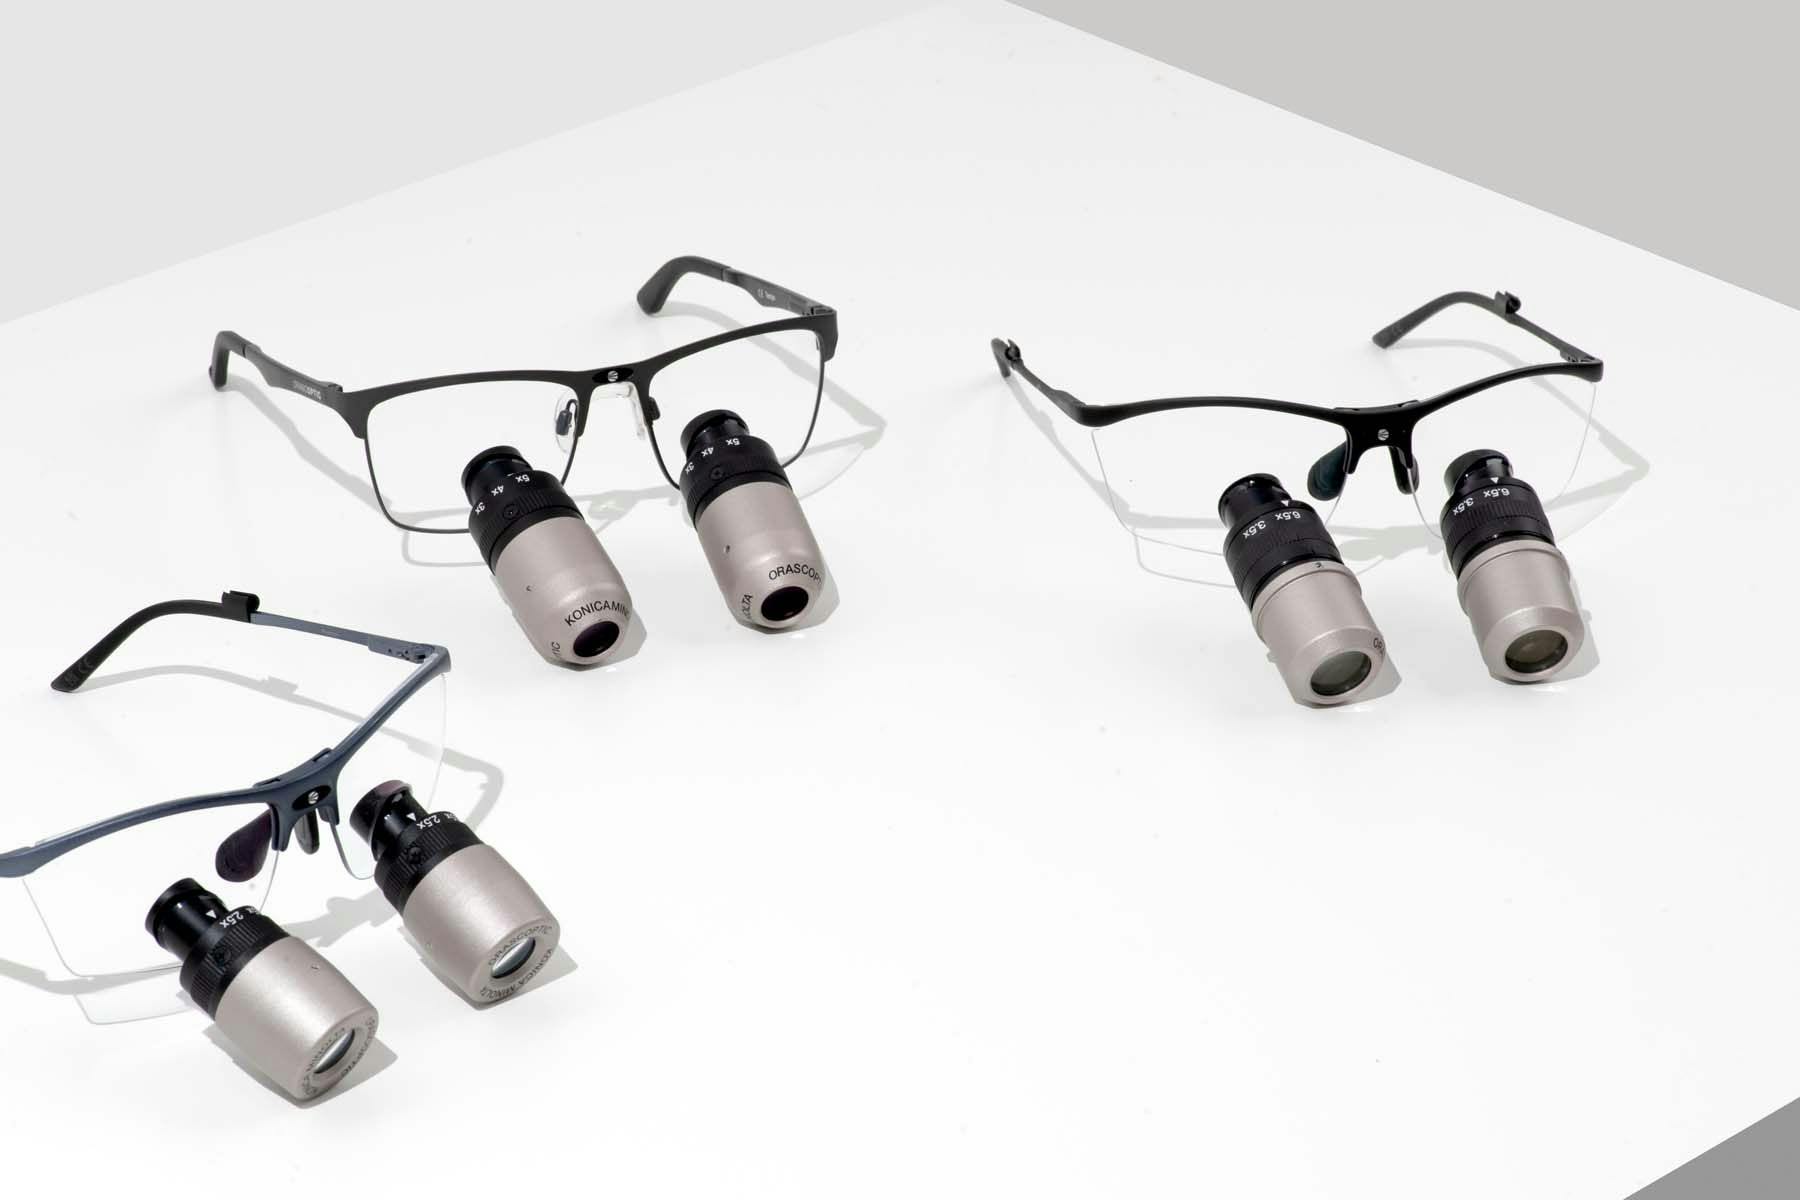 EyeZoom Family: These loupes from Orascoptic are the only 3-in-1 variable magnification loupes. Users can switch seamlessly among magnification levels 3x, 4x, and 5x.